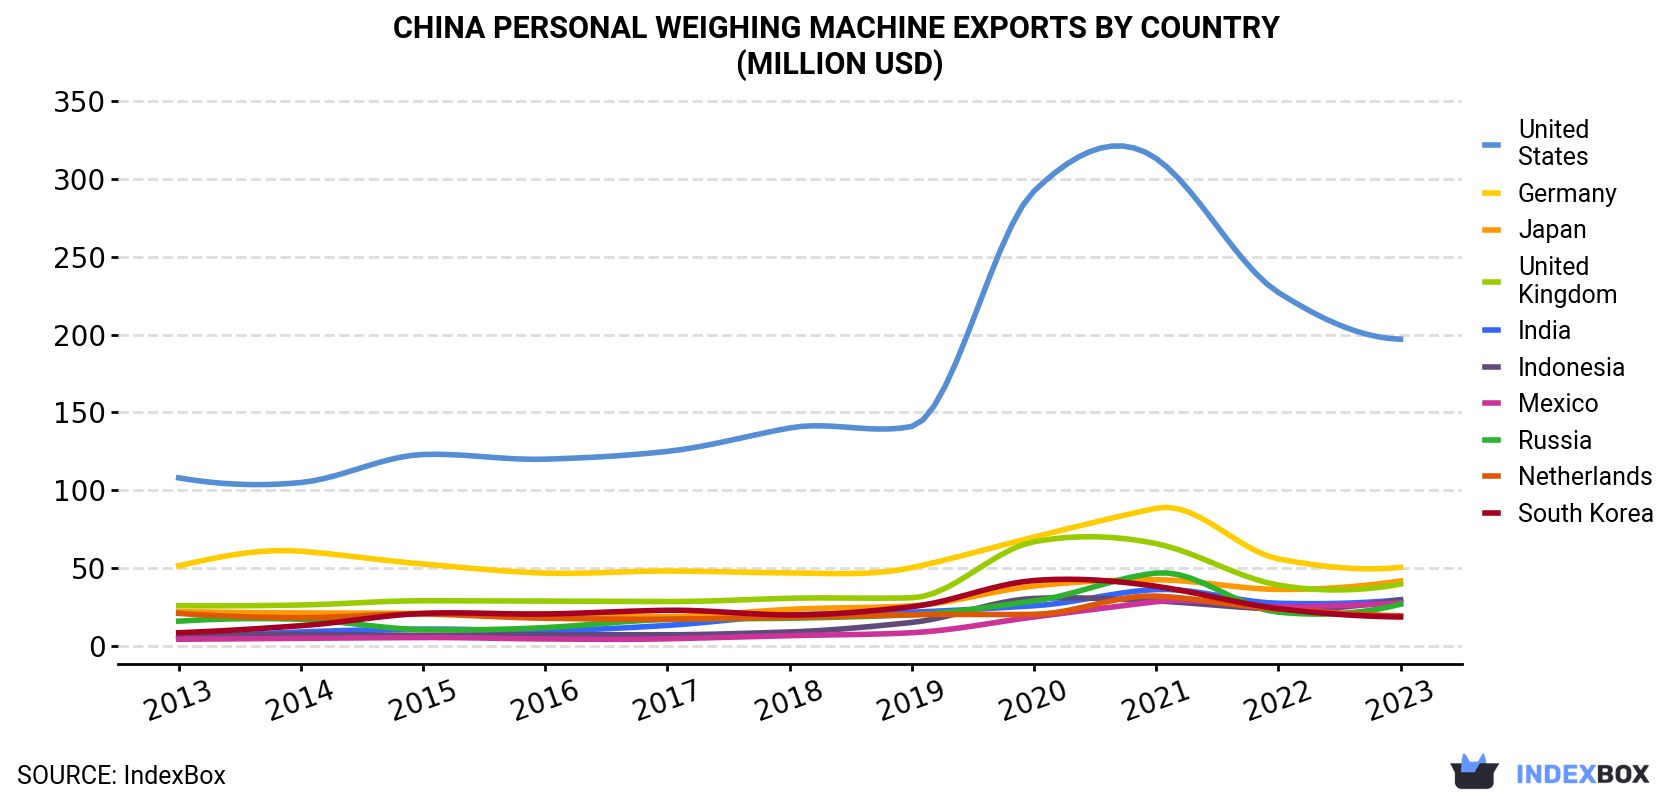 China Personal Weighing Machine Exports By Country (Million USD)